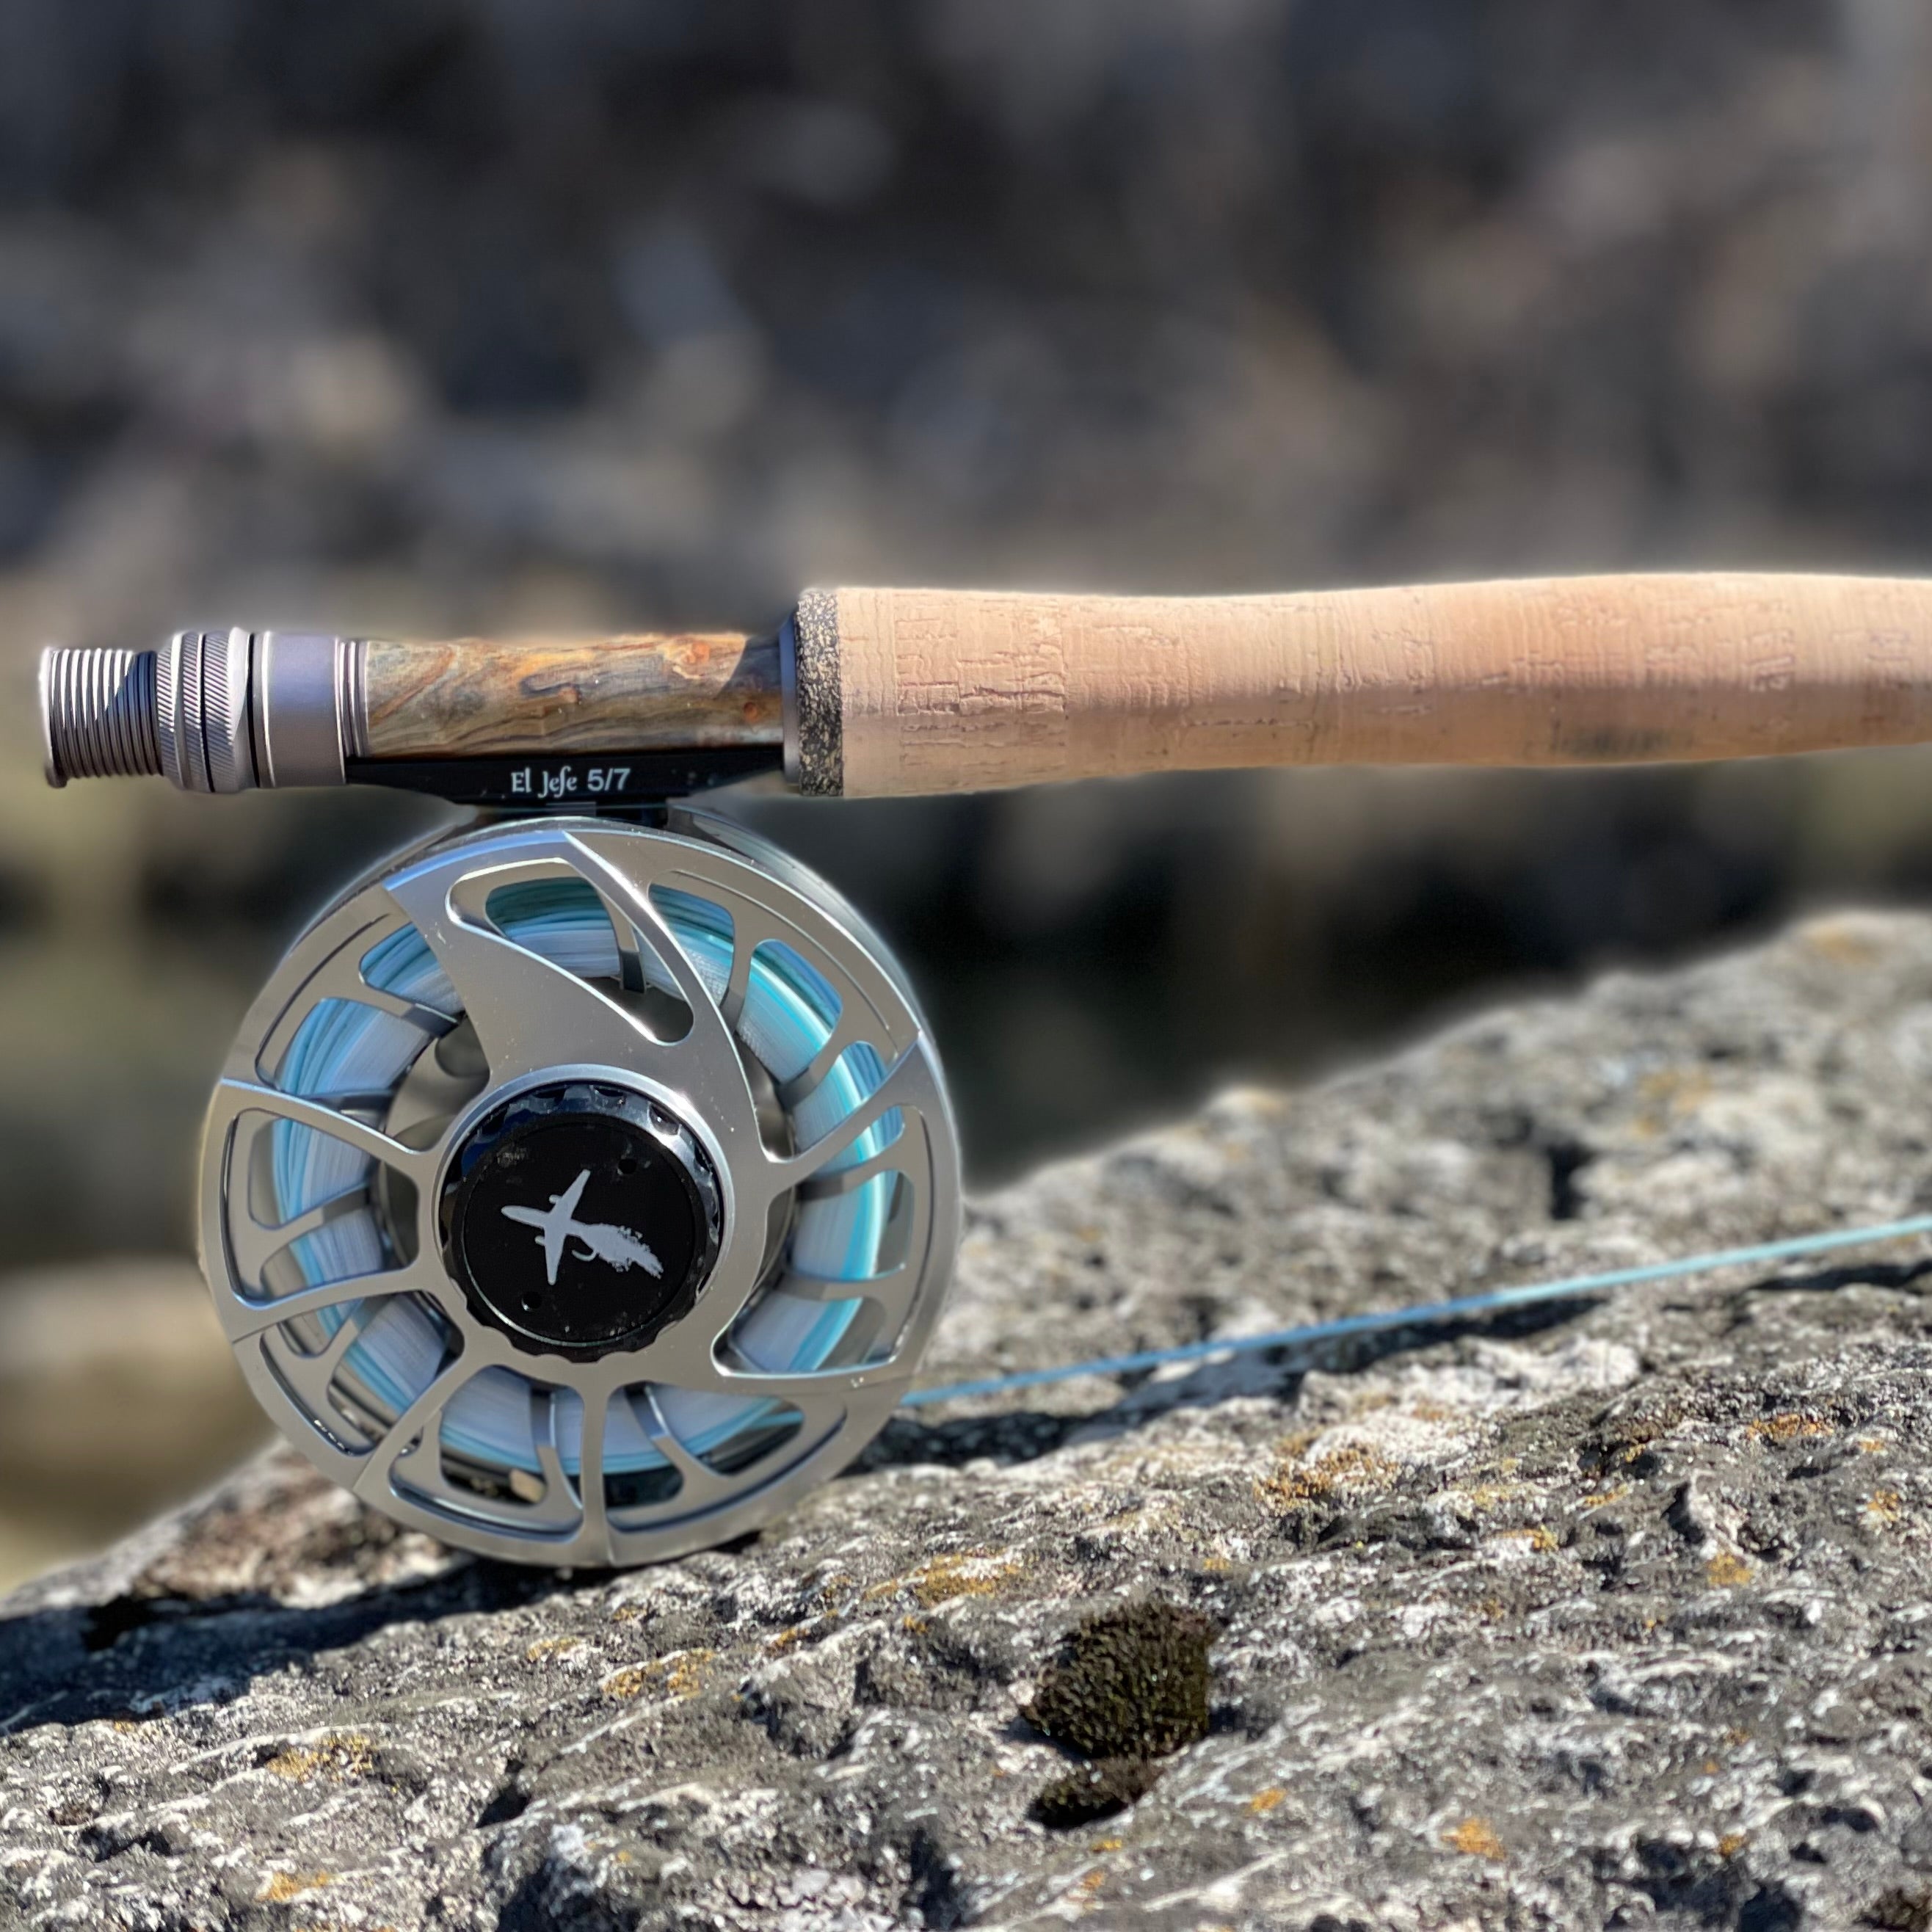 El Jefe Fly Fishing Combo Package | 906-6 | 9' Six Section 6 Weight Fly Rod And Reel Outfit